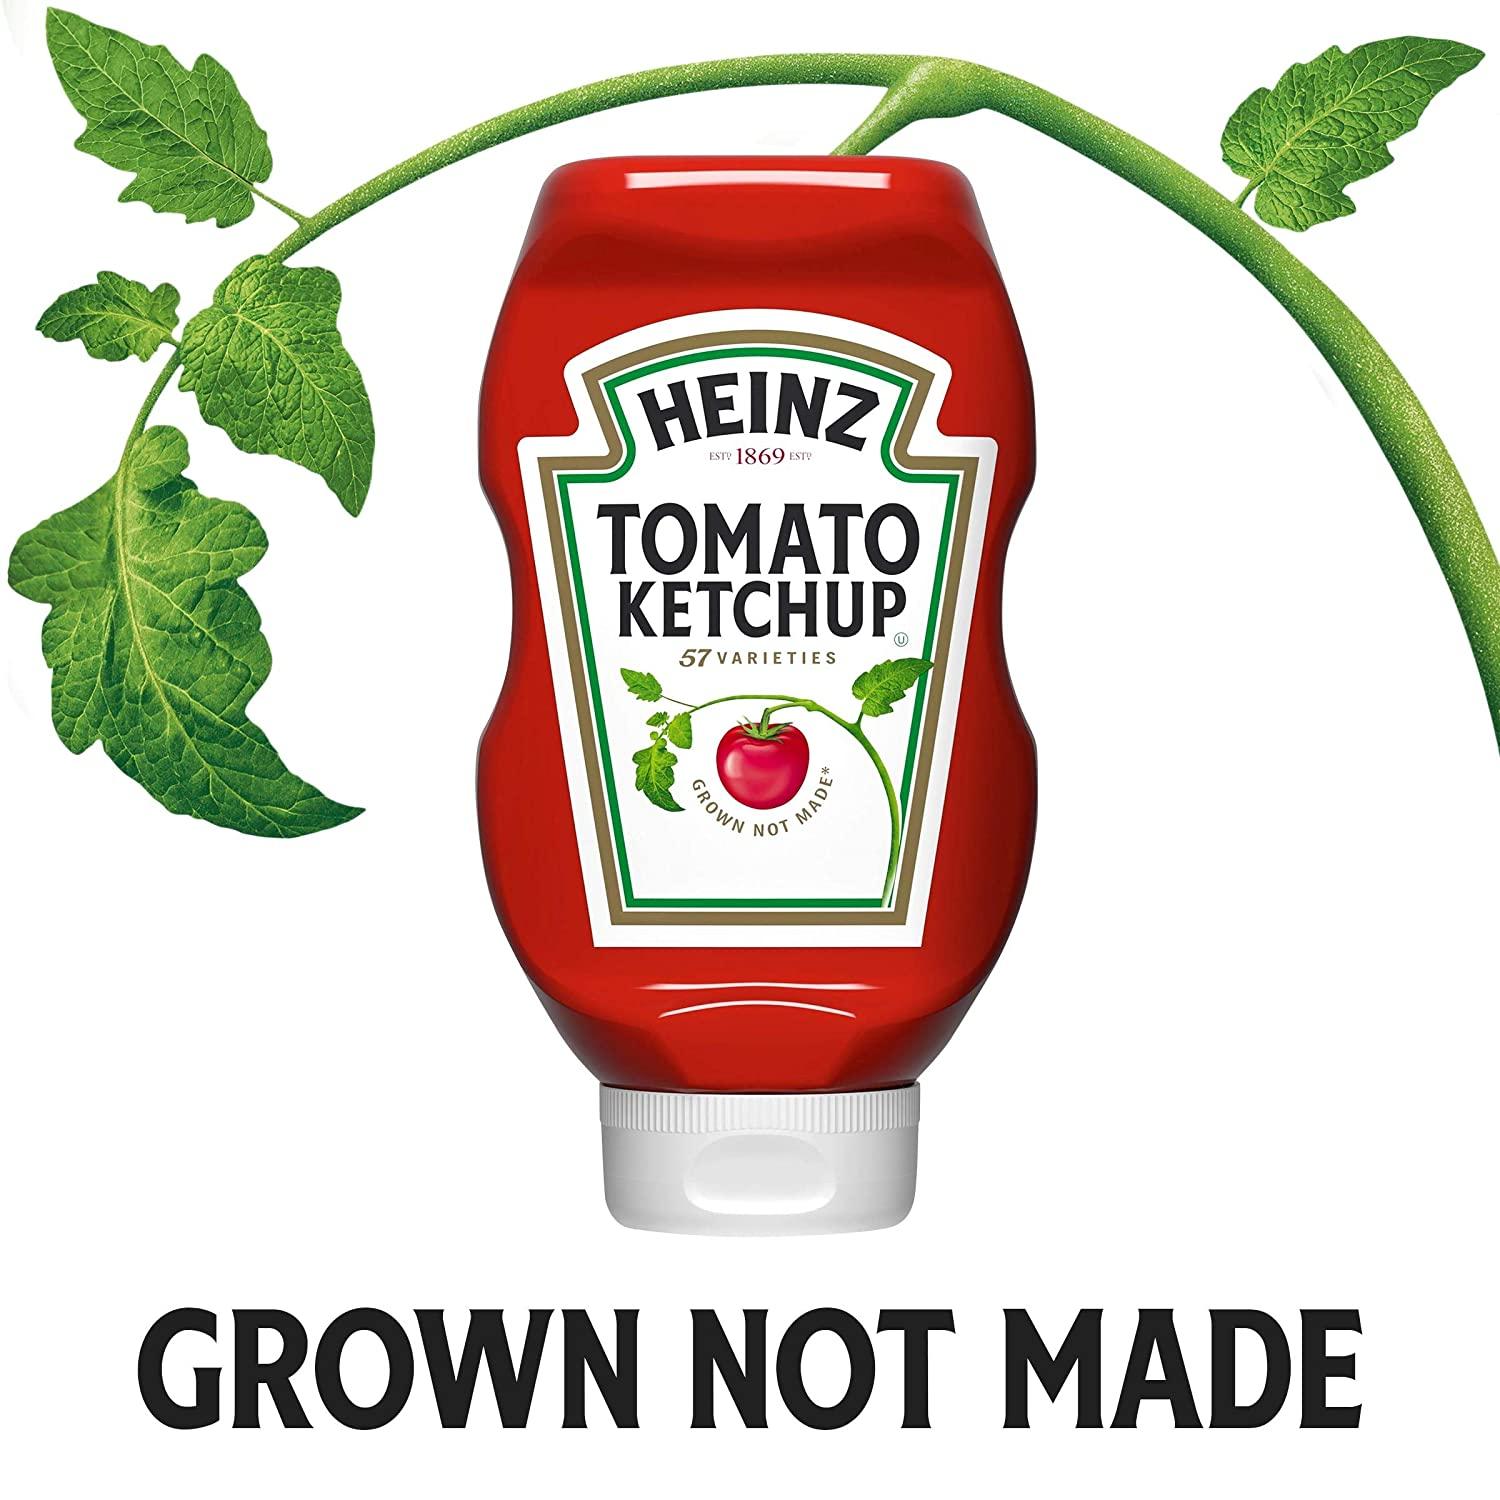 Heinz Tomato Ketchup (20 oz Bottles, Pack of 6) 20 Ounce (Pack of 6)